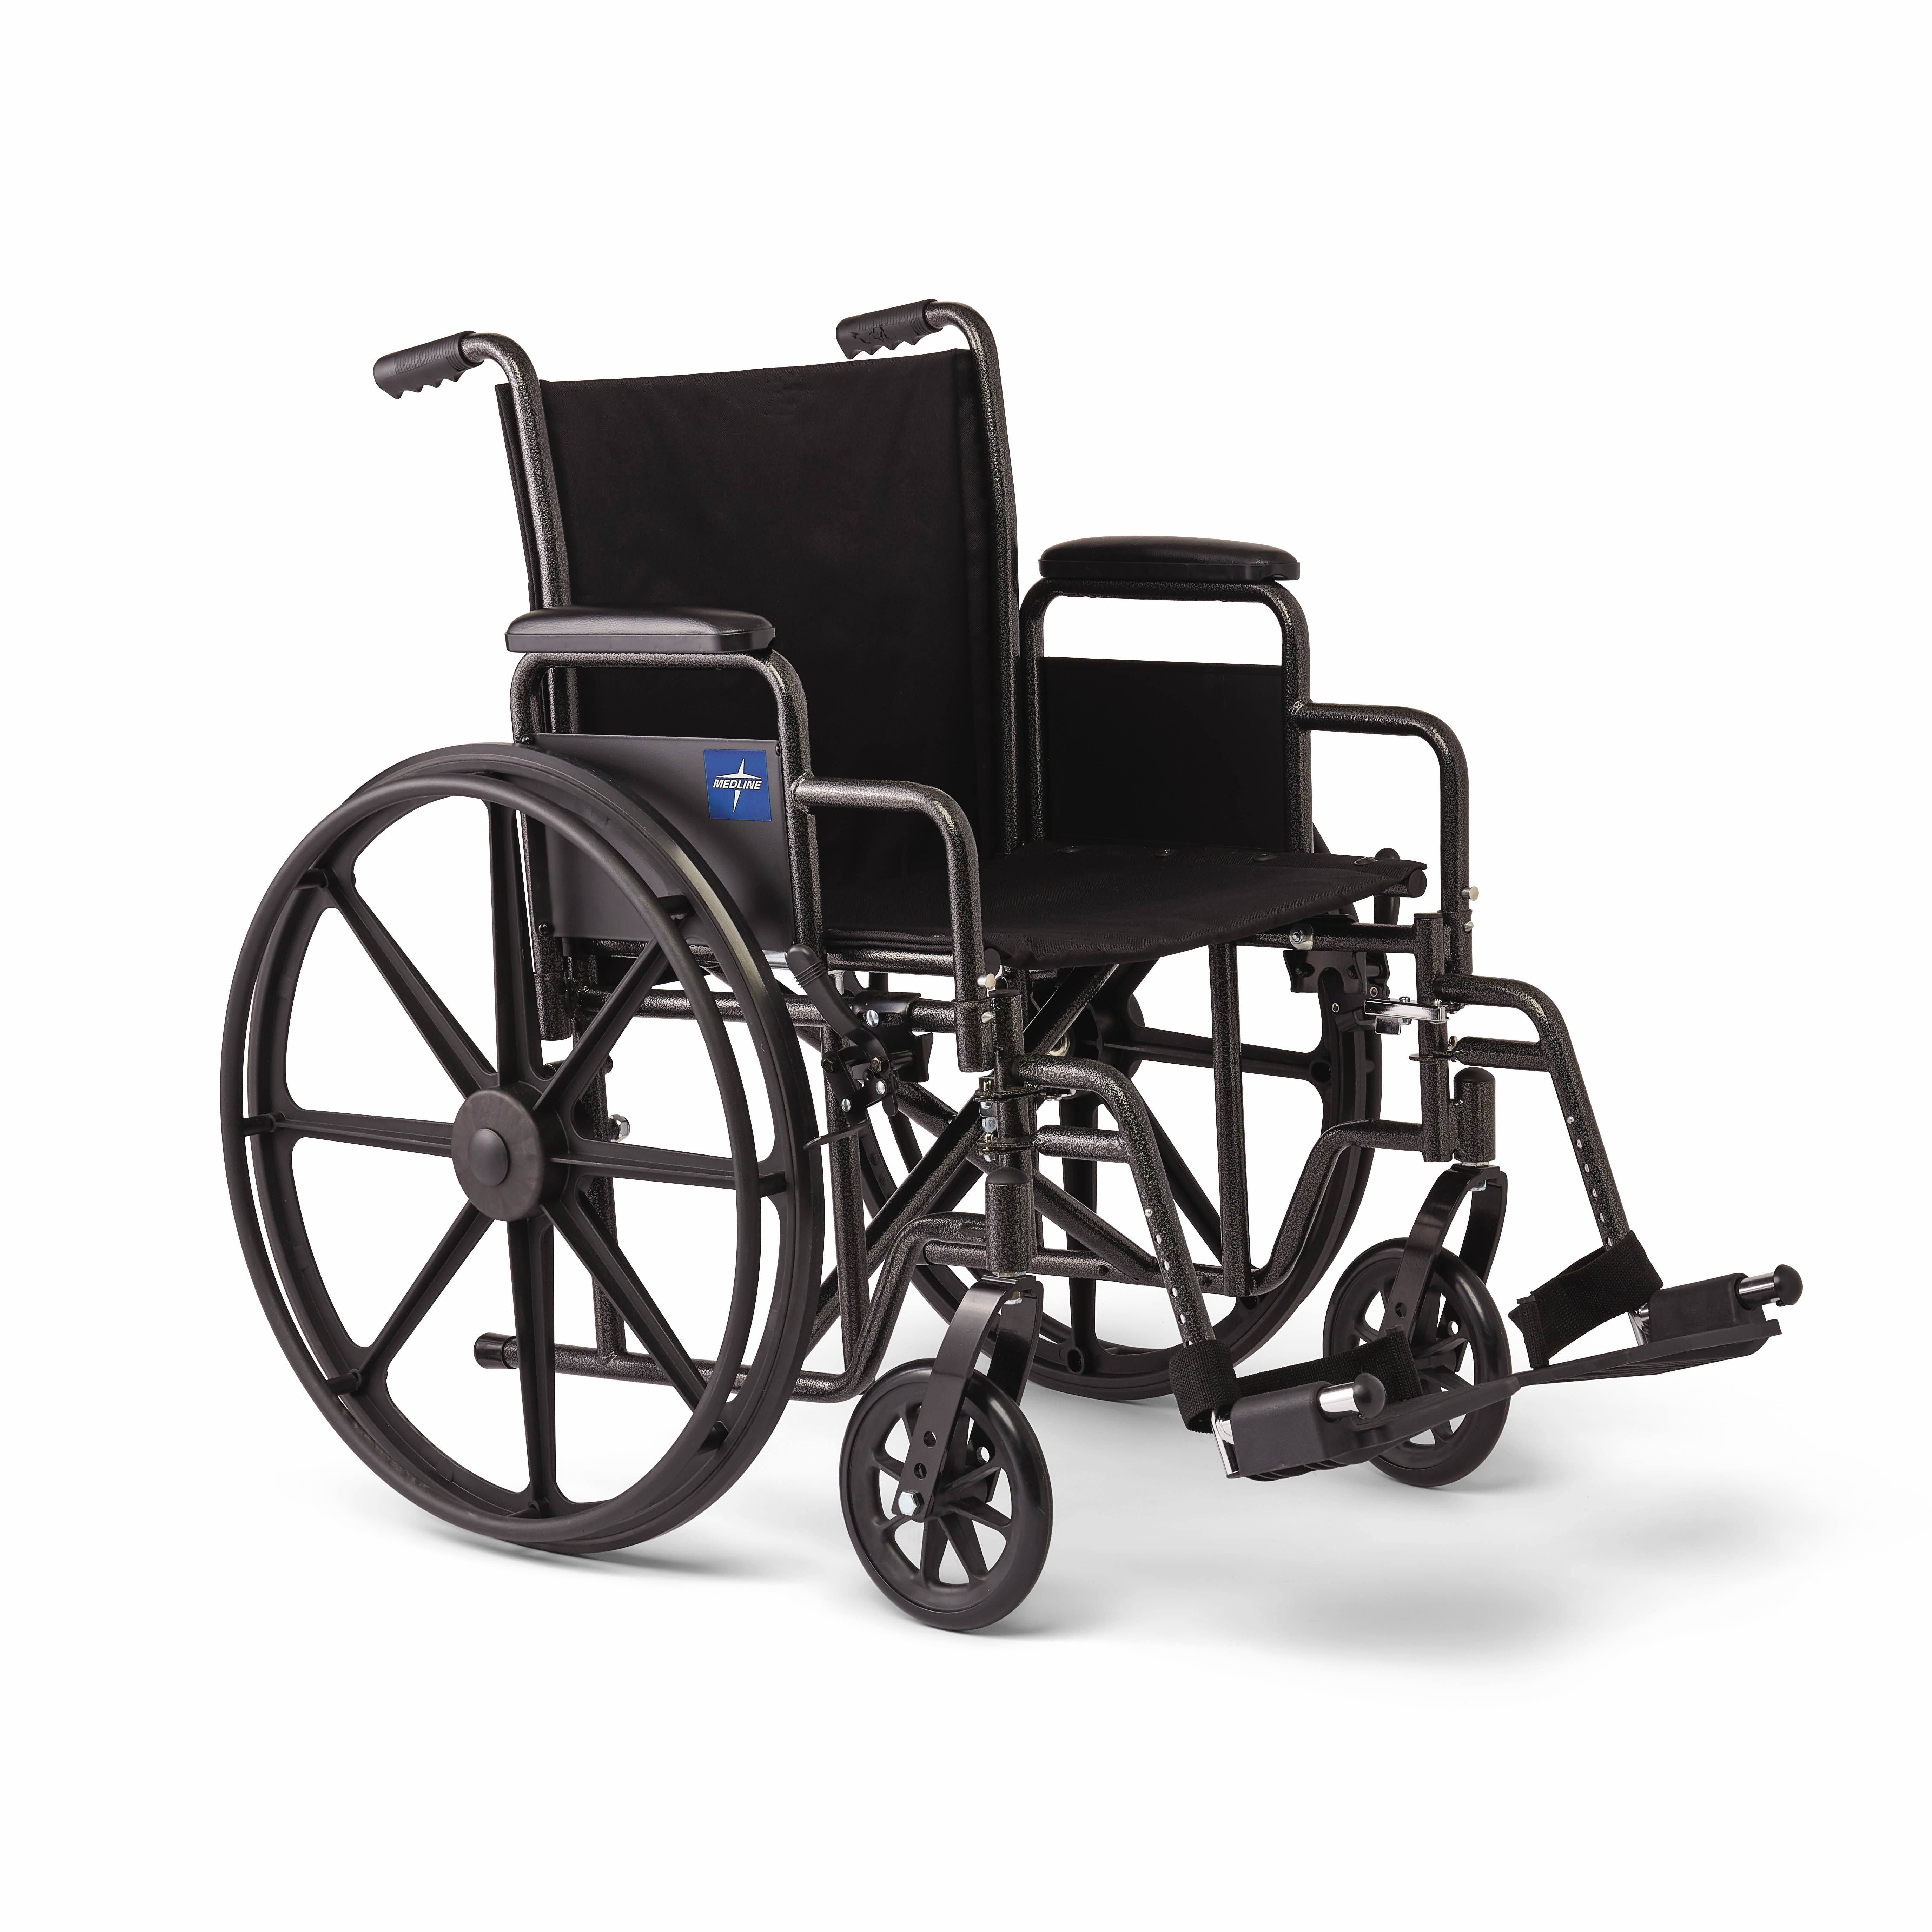 Medline Wheelchairs: 20" Wide K1 Basic Nylon Wheelchair with Swing-Back Desk-Length Arms and Swing-Away Leg Rests